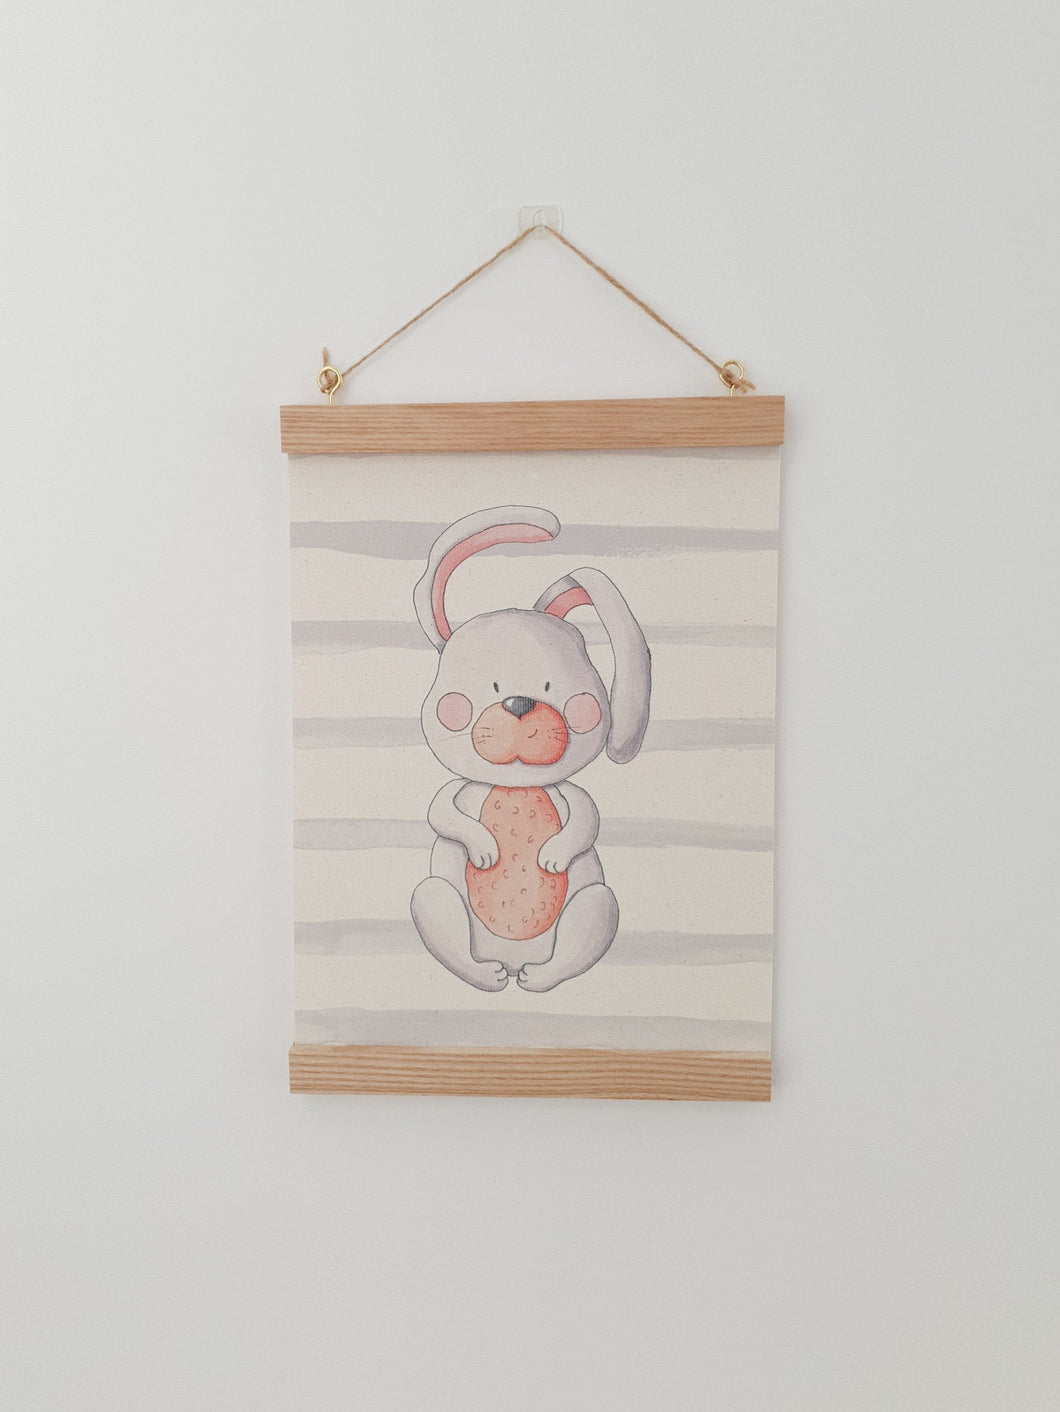 Bunny canvas print with wooden wall hanger